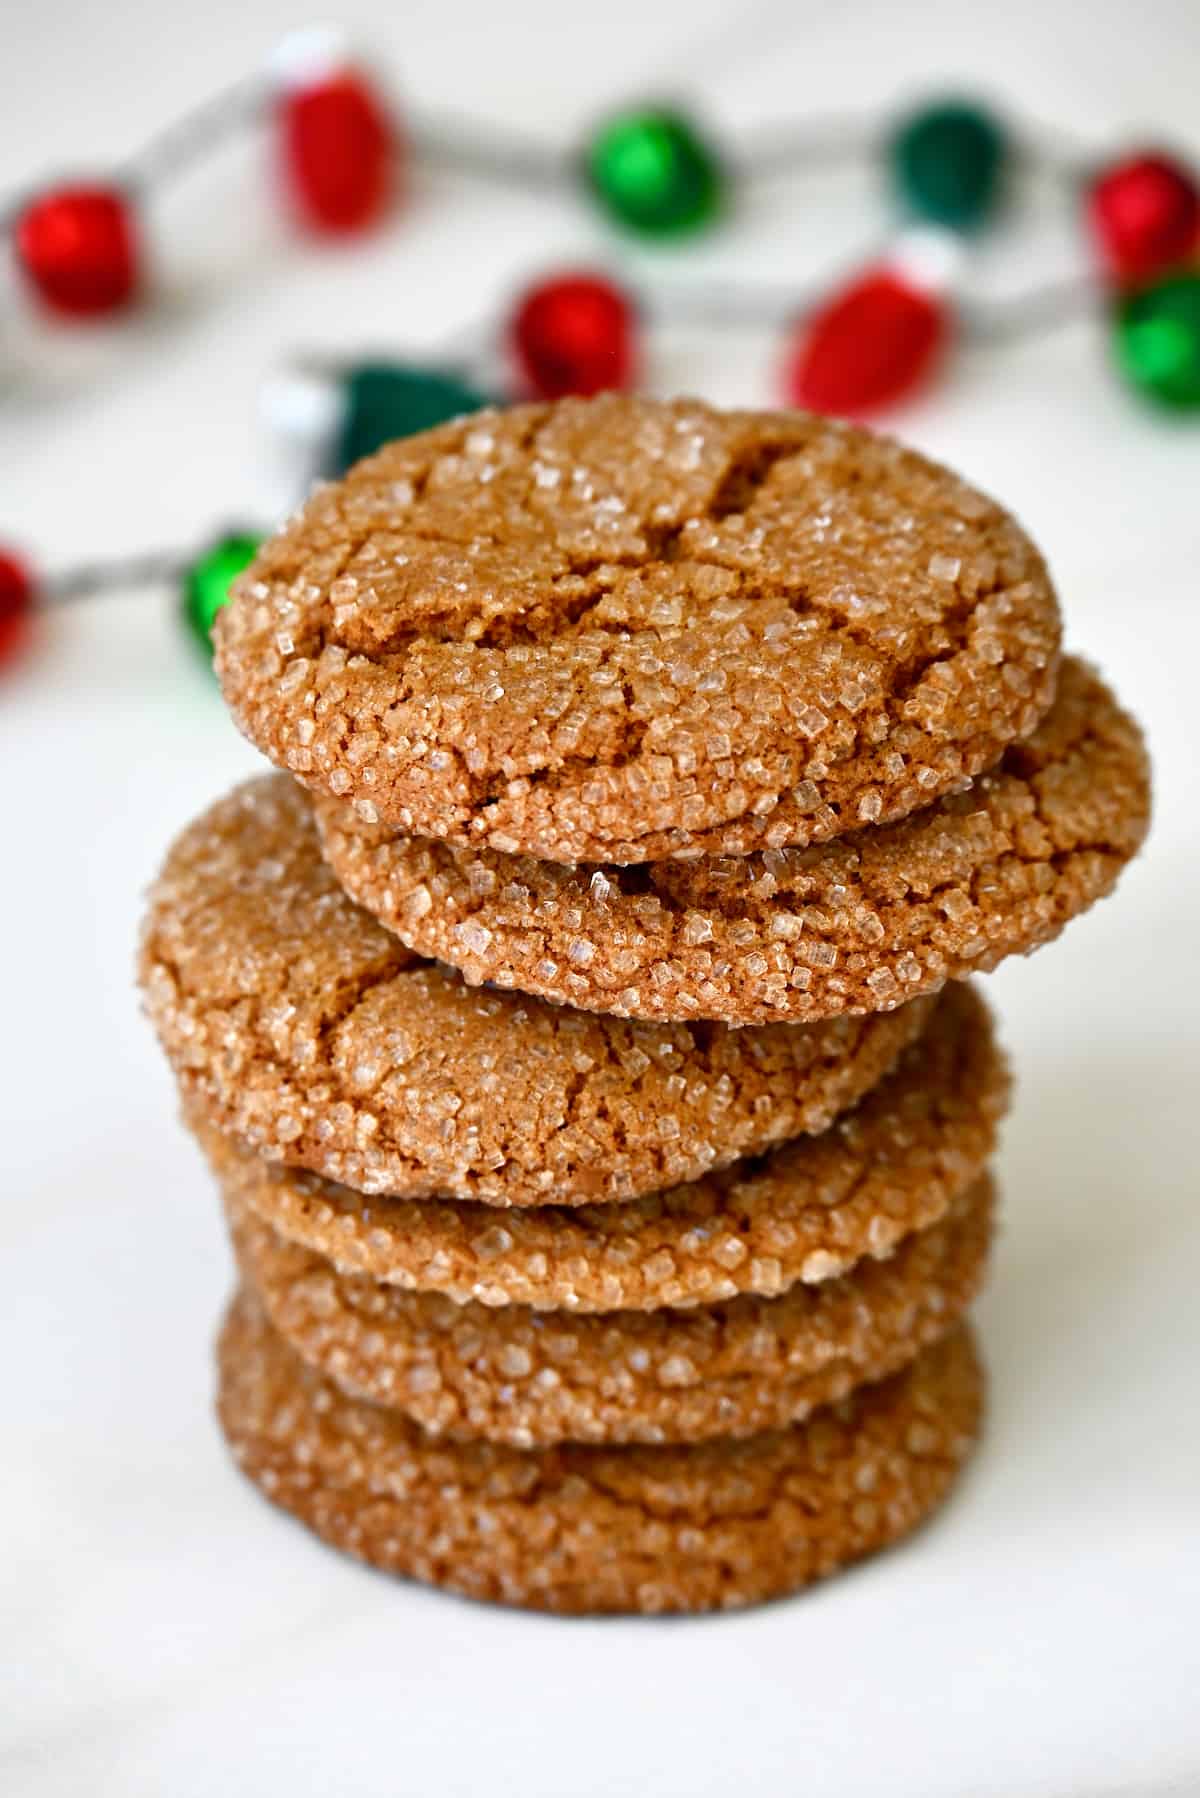 A stack of sugar-dusted ginger cookies are on a white surface, with red and green decorations in the background.